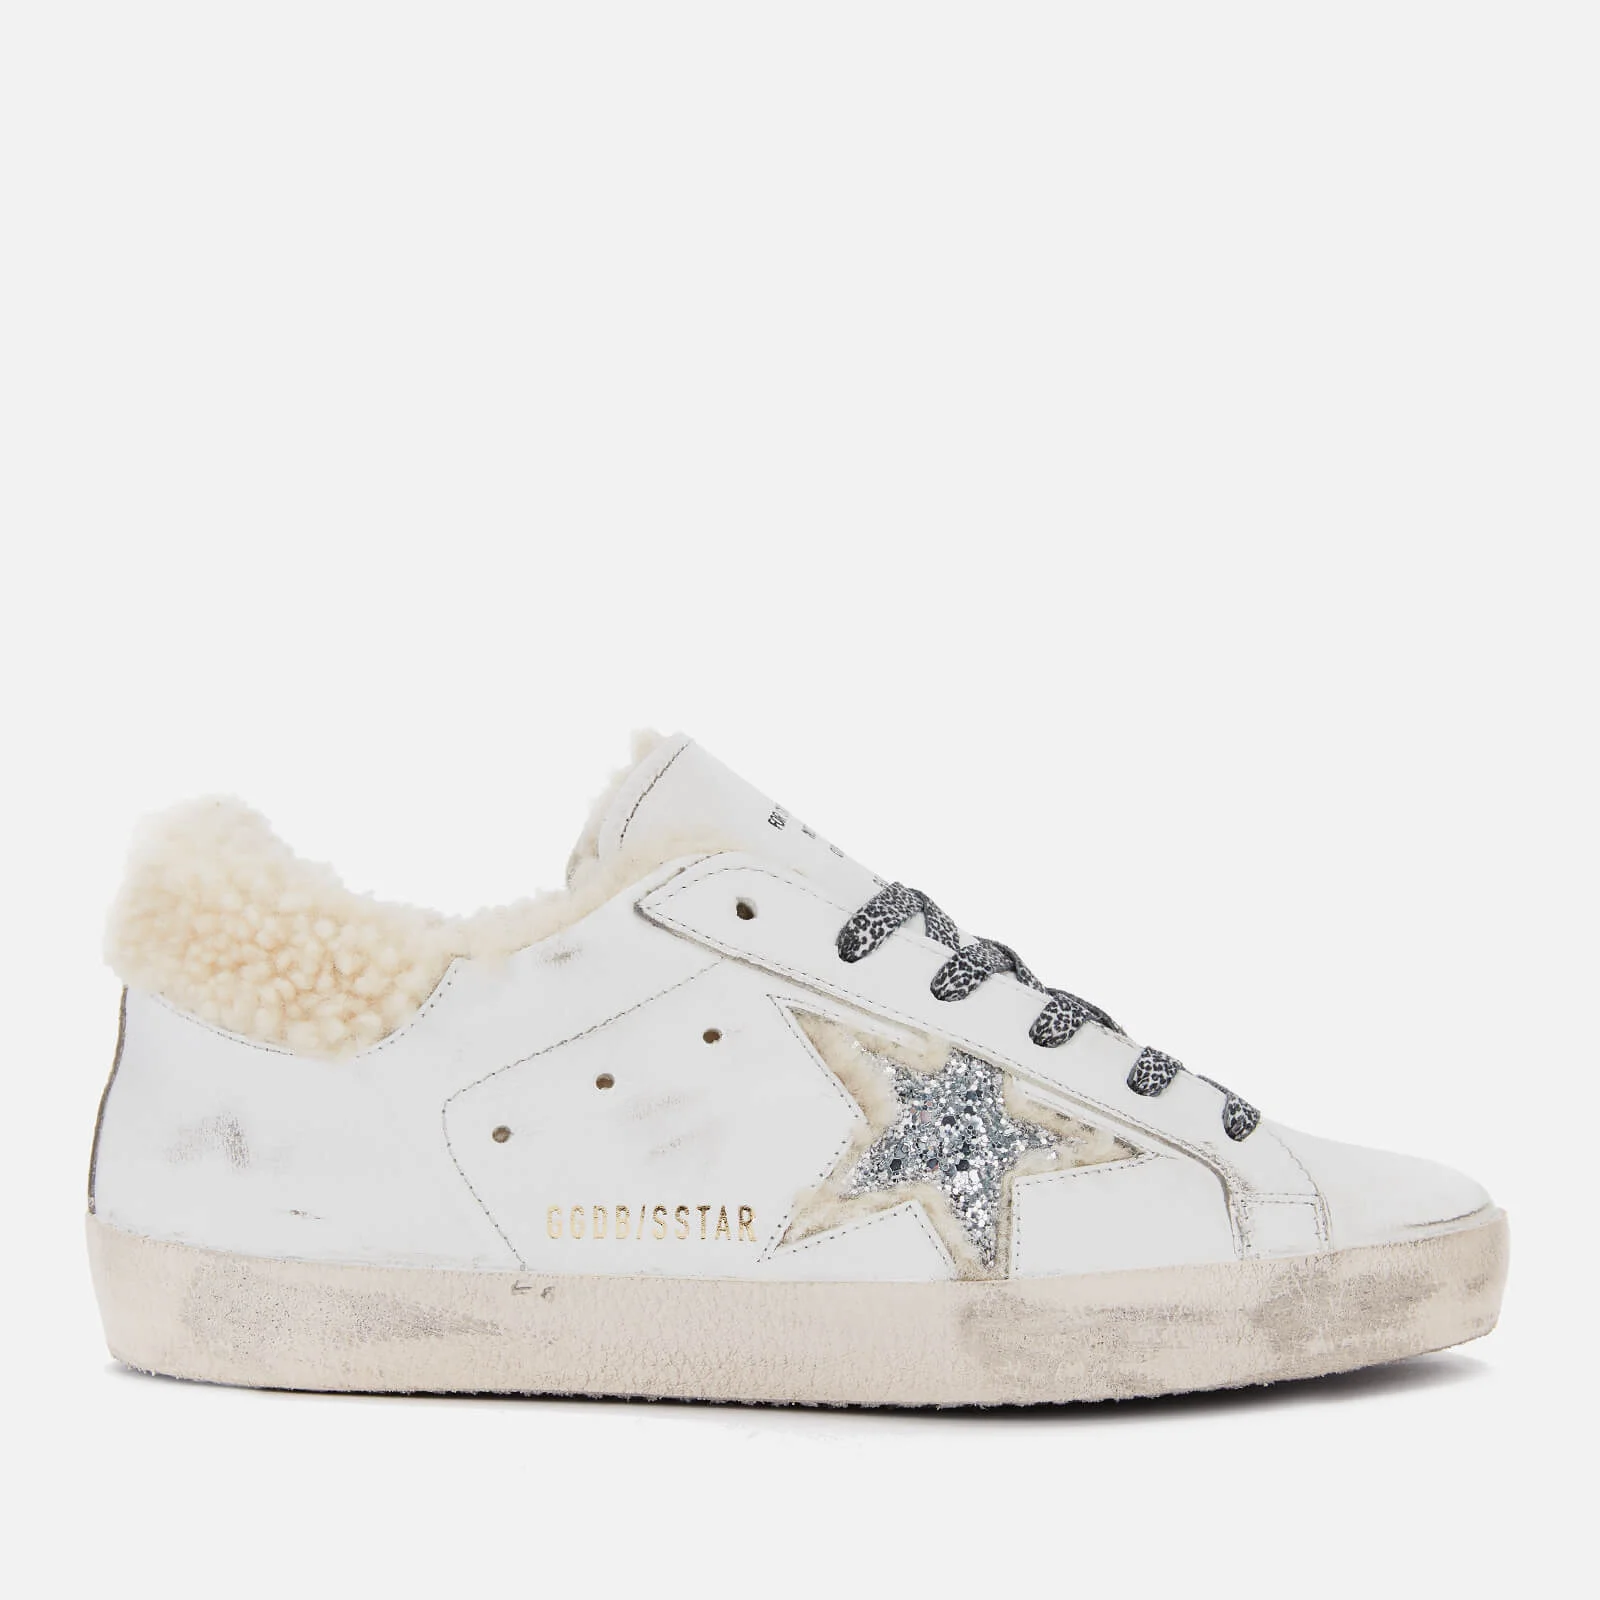 Golden Goose Women's Superstar Leather Trainers - White Shearling/Silver Glitter Star Image 1